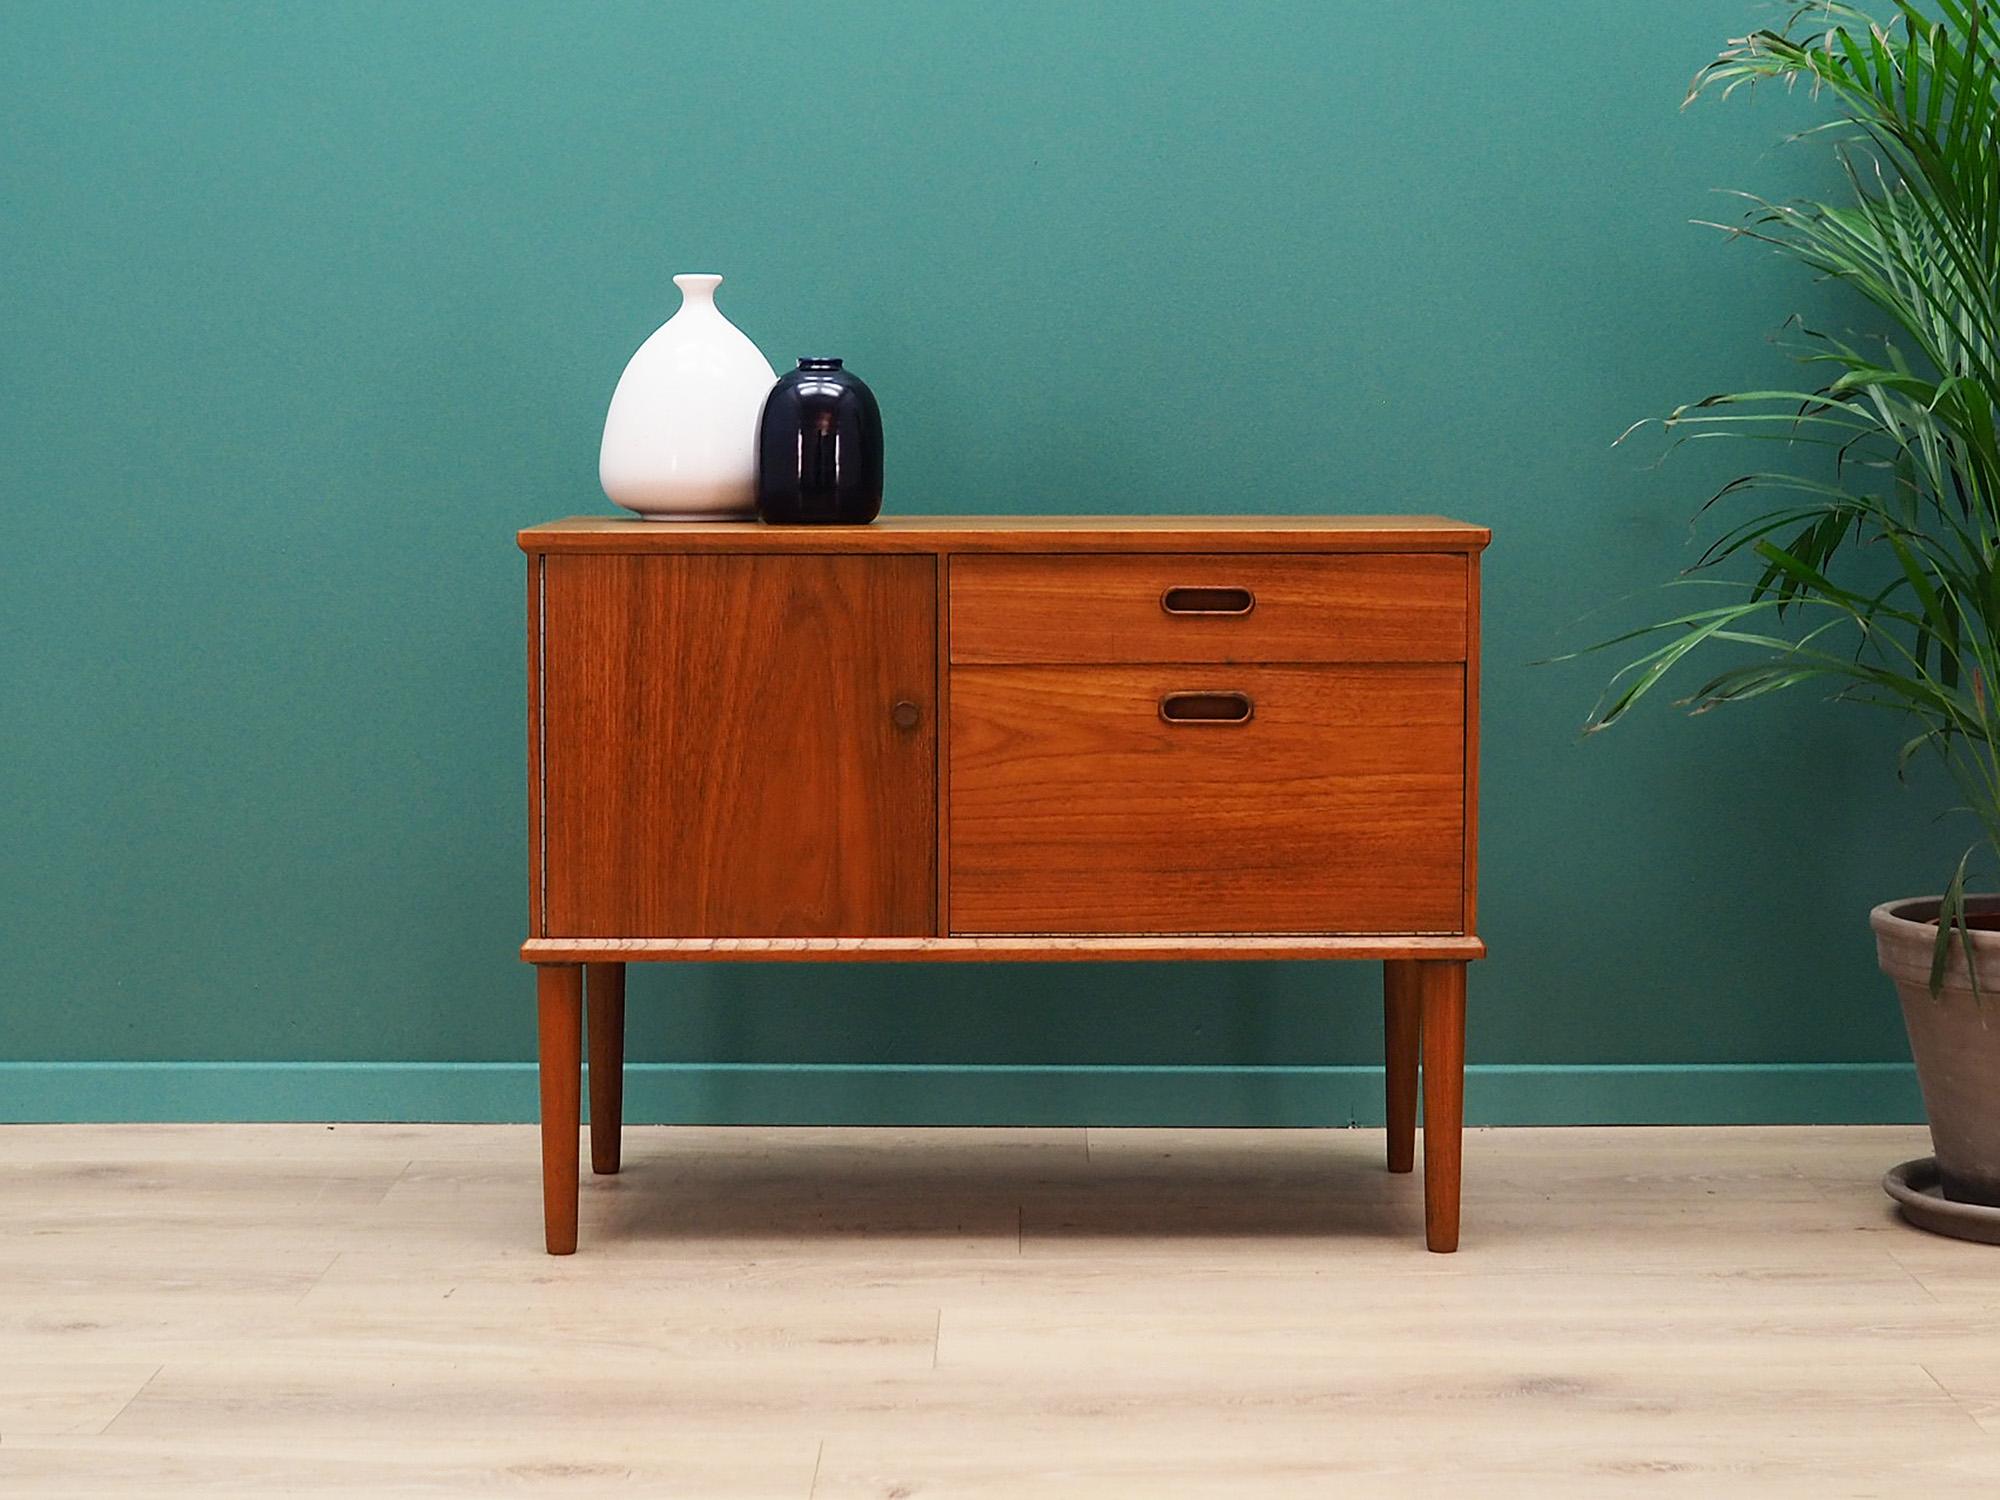 Phenomenal cabinet from the 1960s-1970s. Scandinavian design, Minimalist form. Manufactured by Vinde Møbelfabrik. Surface of the furniture finished with teak veneer. Preserved in good condition (Fine bruises and scratches, filled veneer cavities),